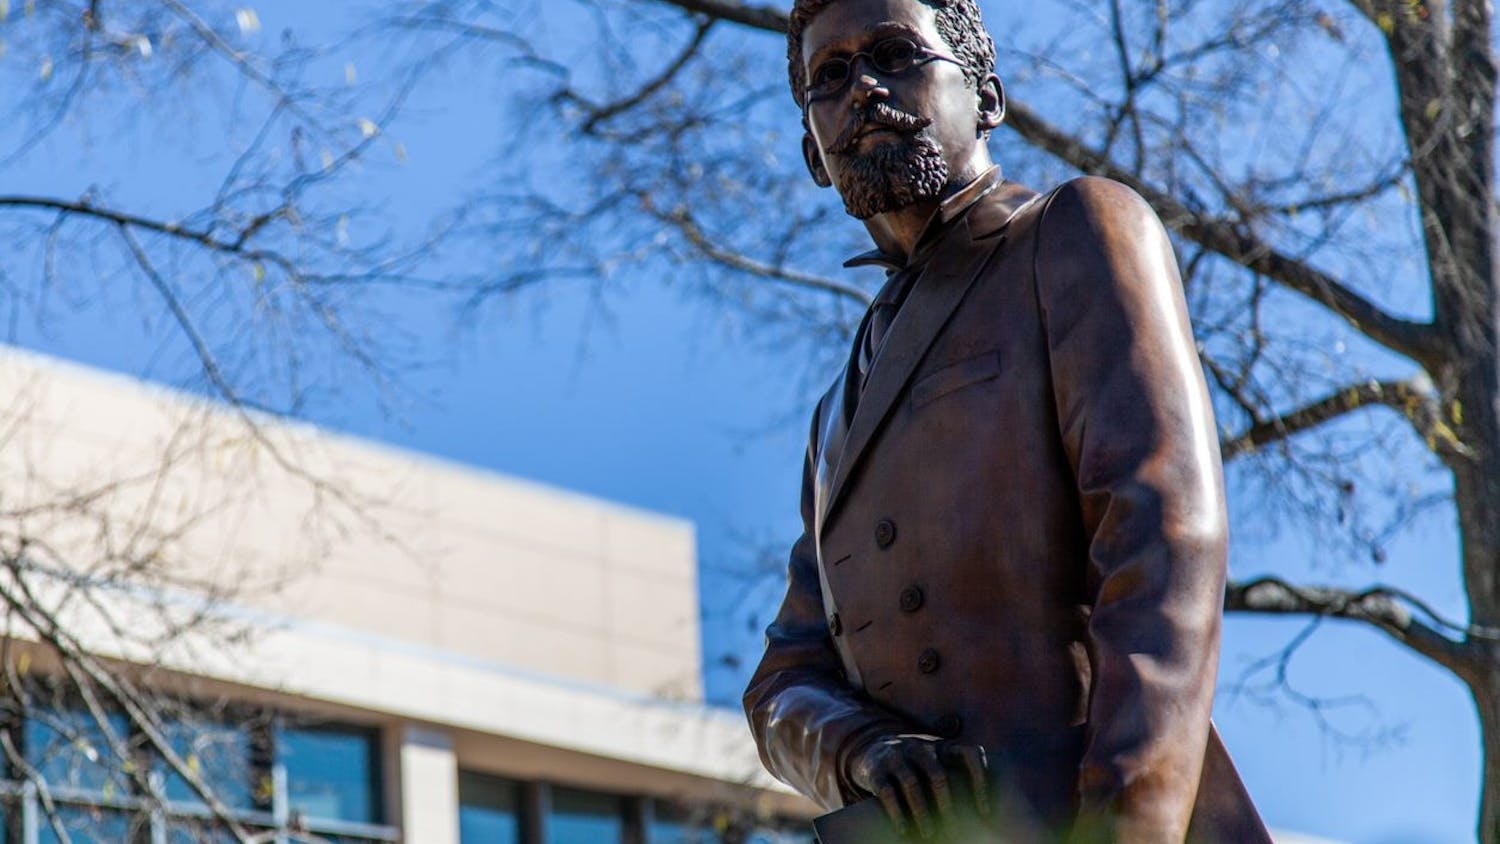 The Richard T. Greener statue in front of the Thomas Cooper Library on Jan. 18, 2022 in Columbia, SC. Greener was the first African American professor at the University of South Carolina.